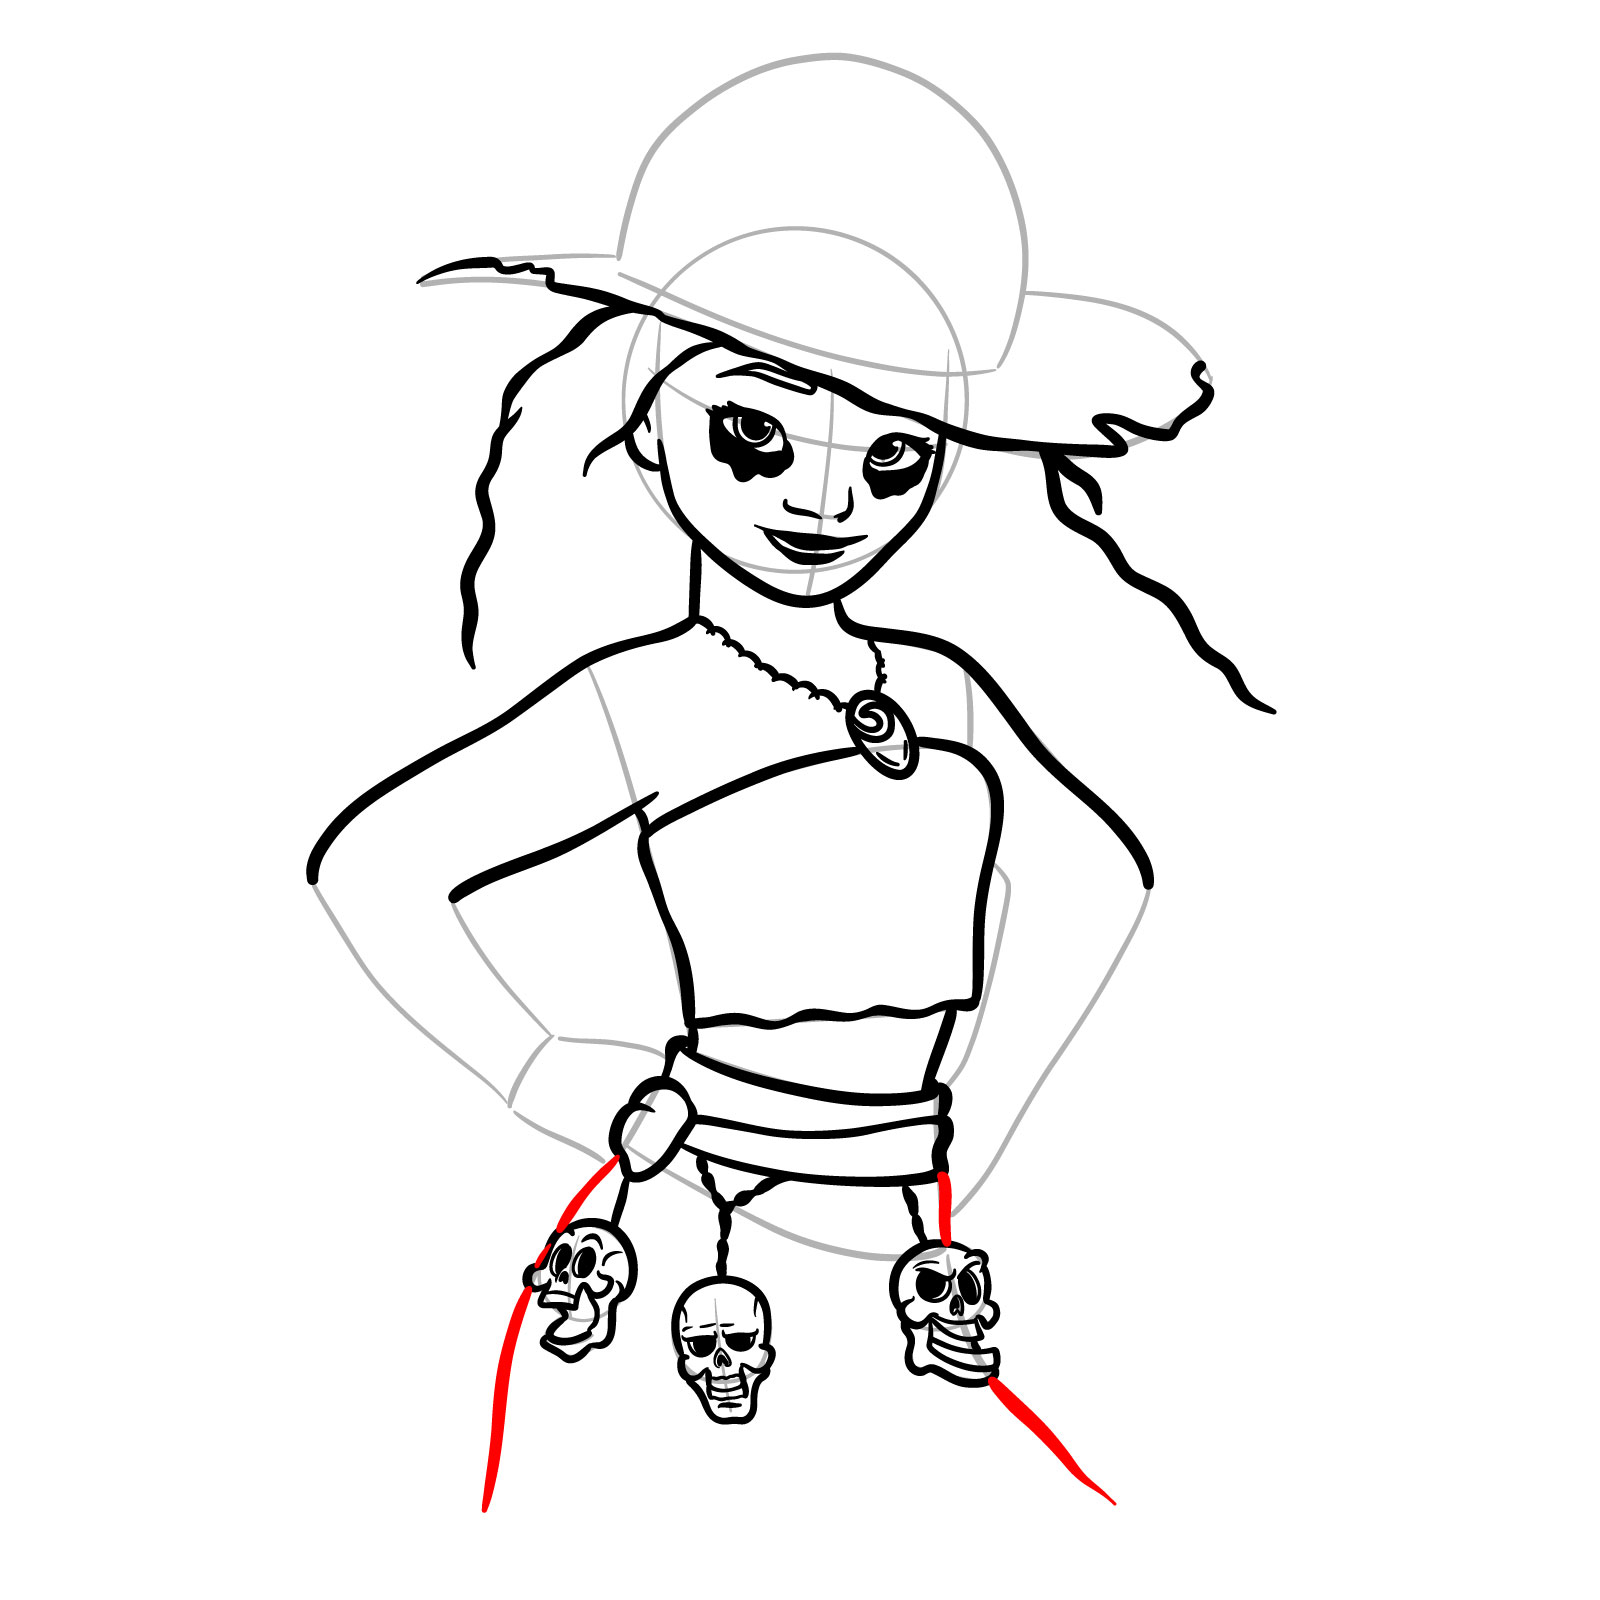 How to Draw Halloween Moana as a Staw Hat Pirate - step 28